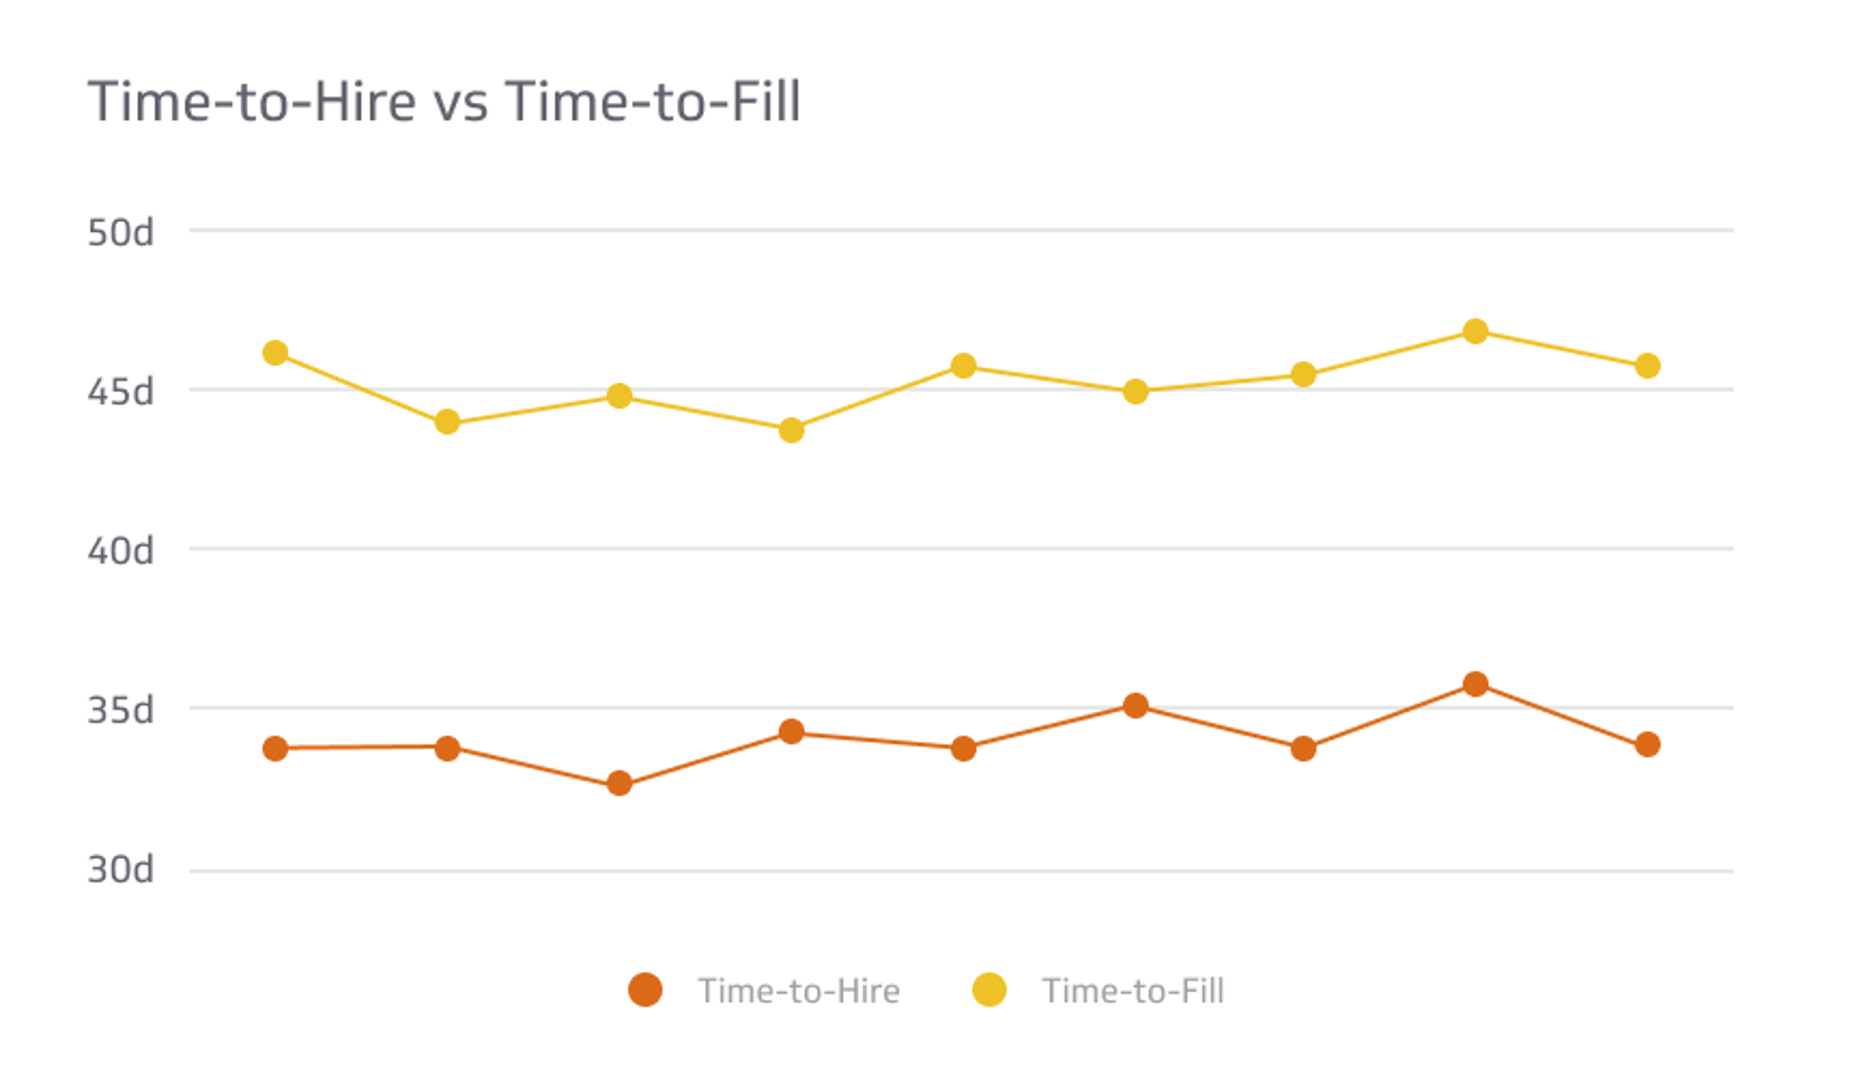 HR KPI Example - Time-to-Hire vs Time-to-Fill Metric